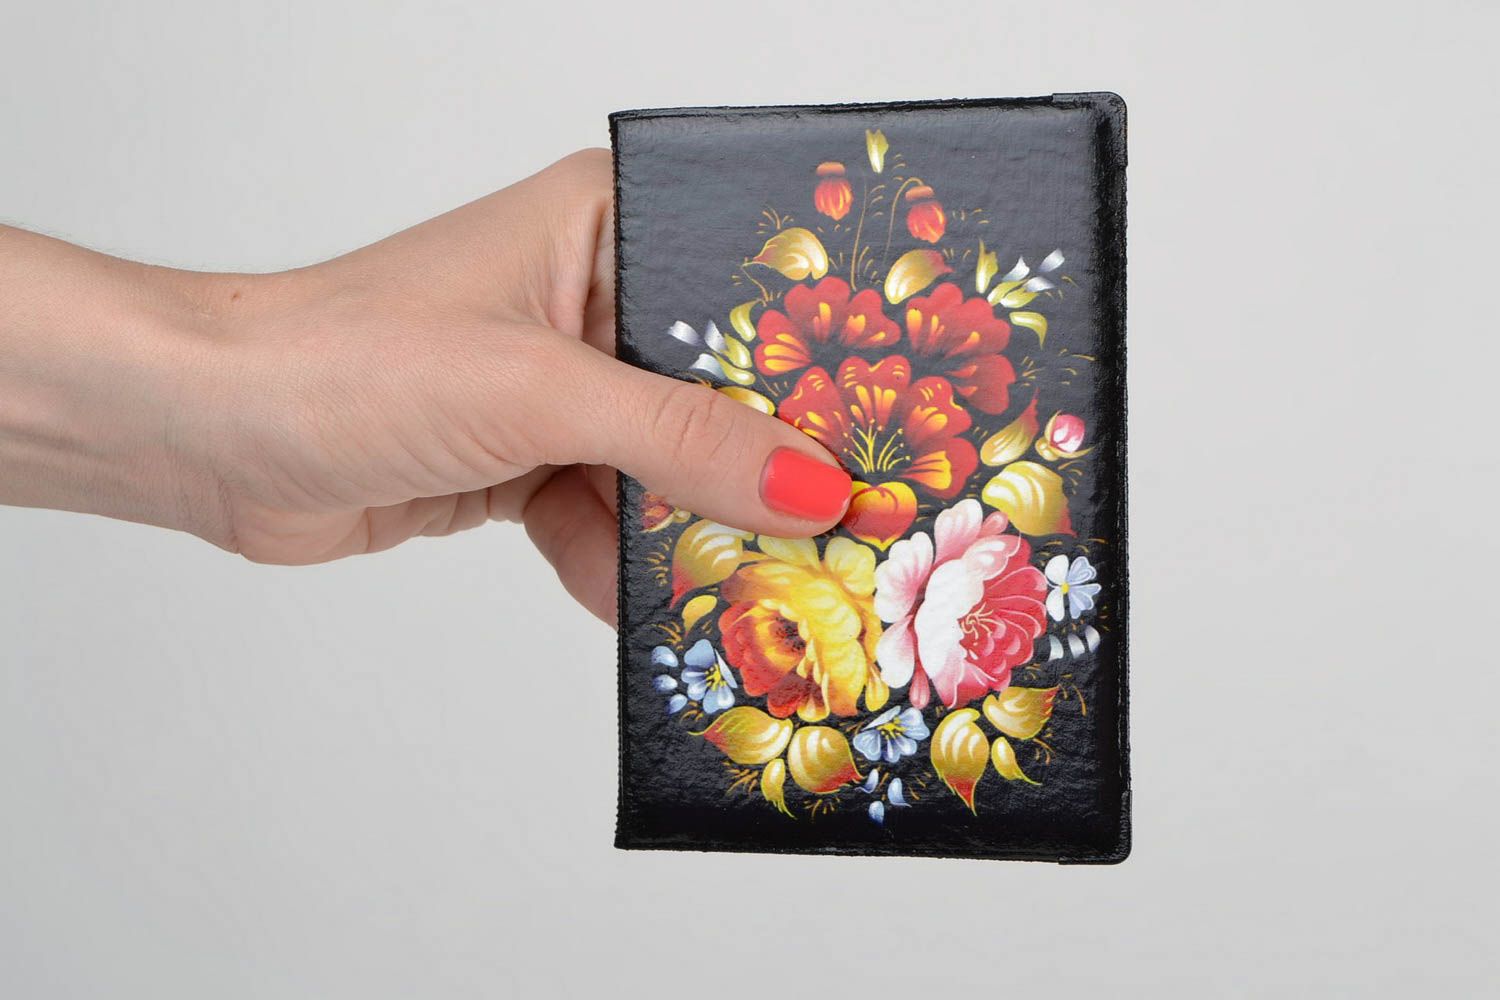 Handmade black faux leather passport cover with decoupage image bright flowers photo 2